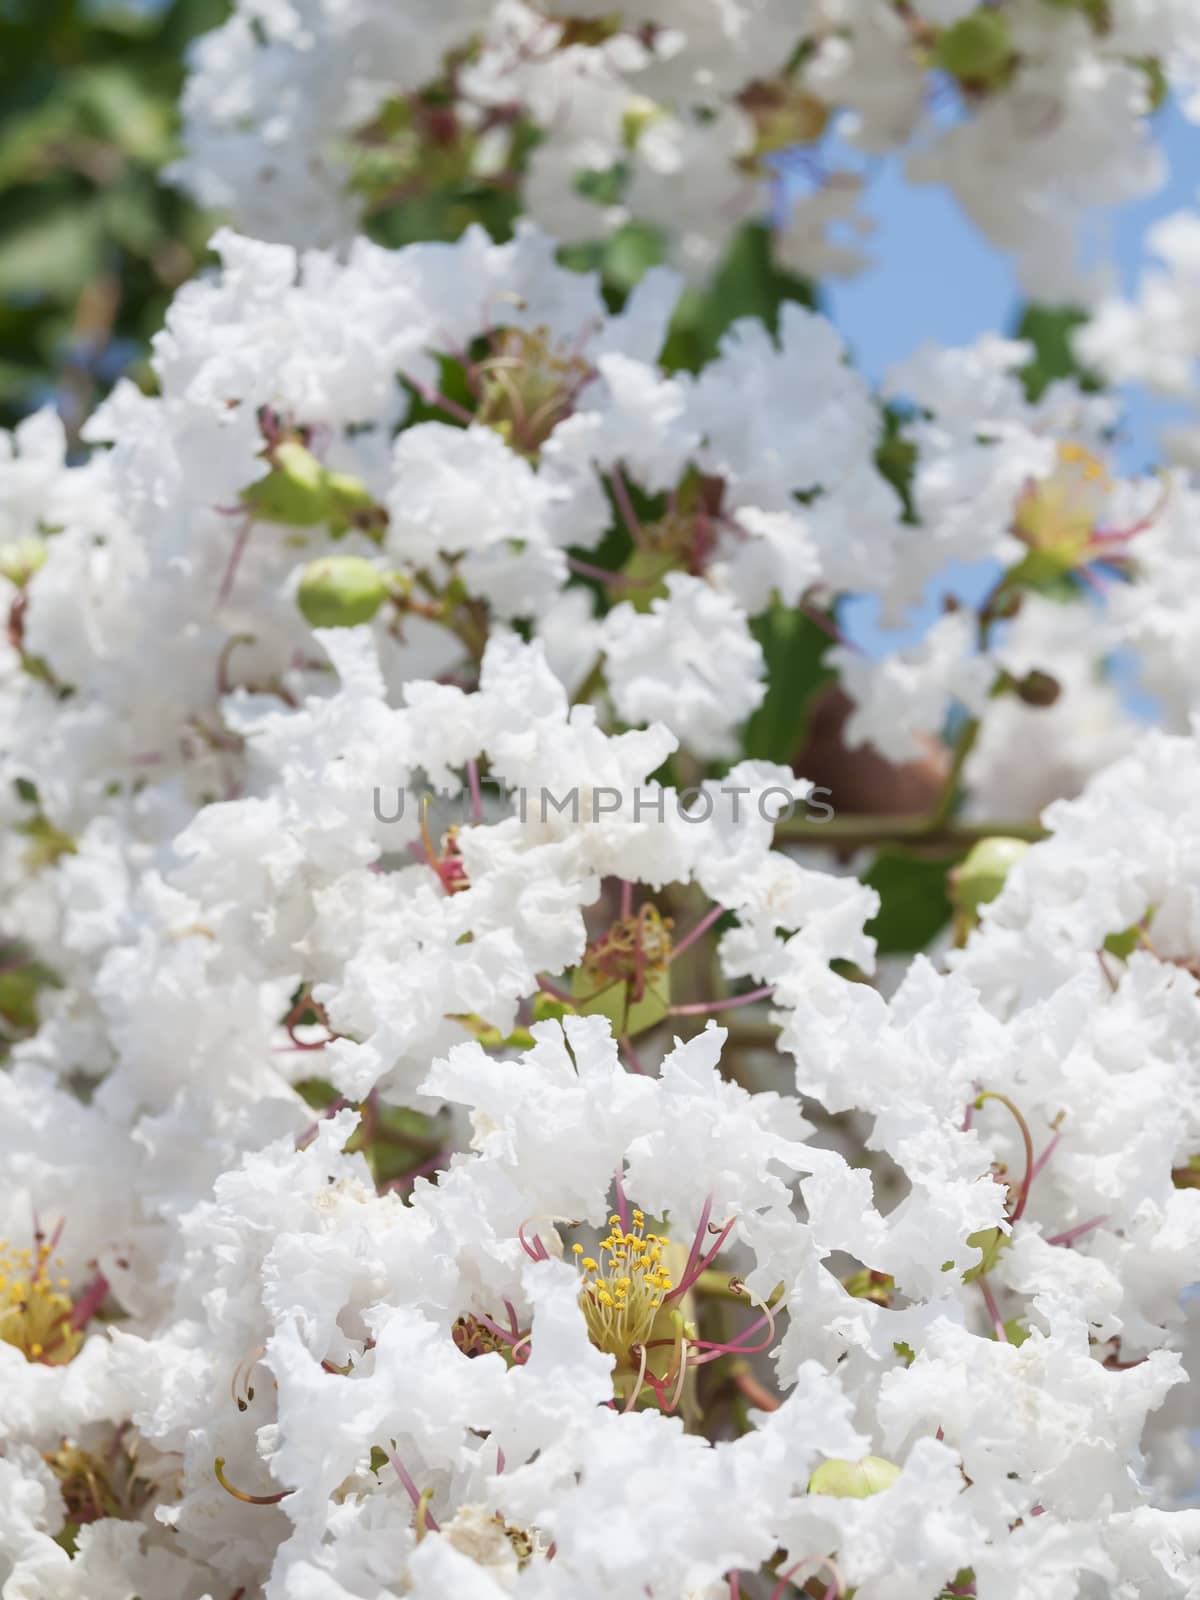 Flower of white Lagerstroemia indica(Crape myrtle) family Lythraceae, shallow depth of field focus on pollen.